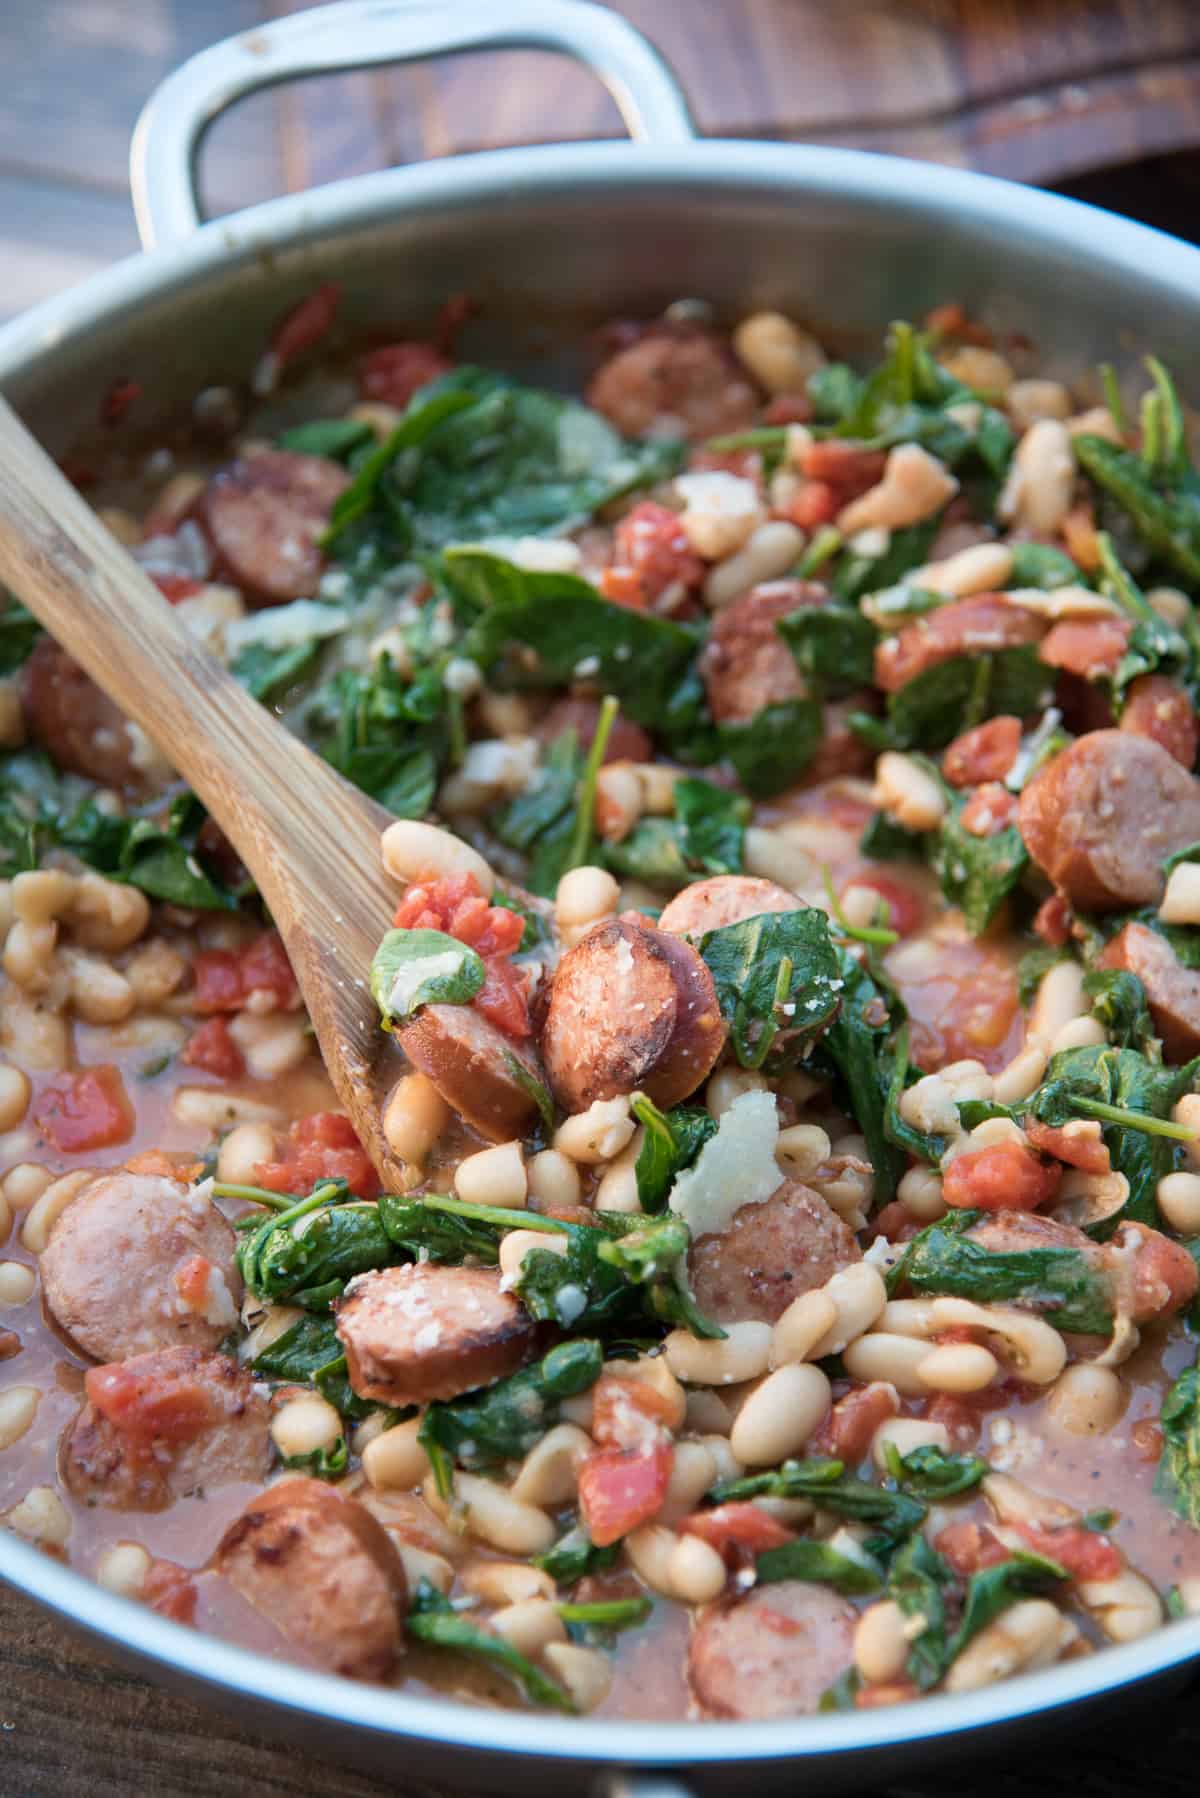 A close up of a wooden spoon resting in a skillet filled with sausage, white beans, and spinach.